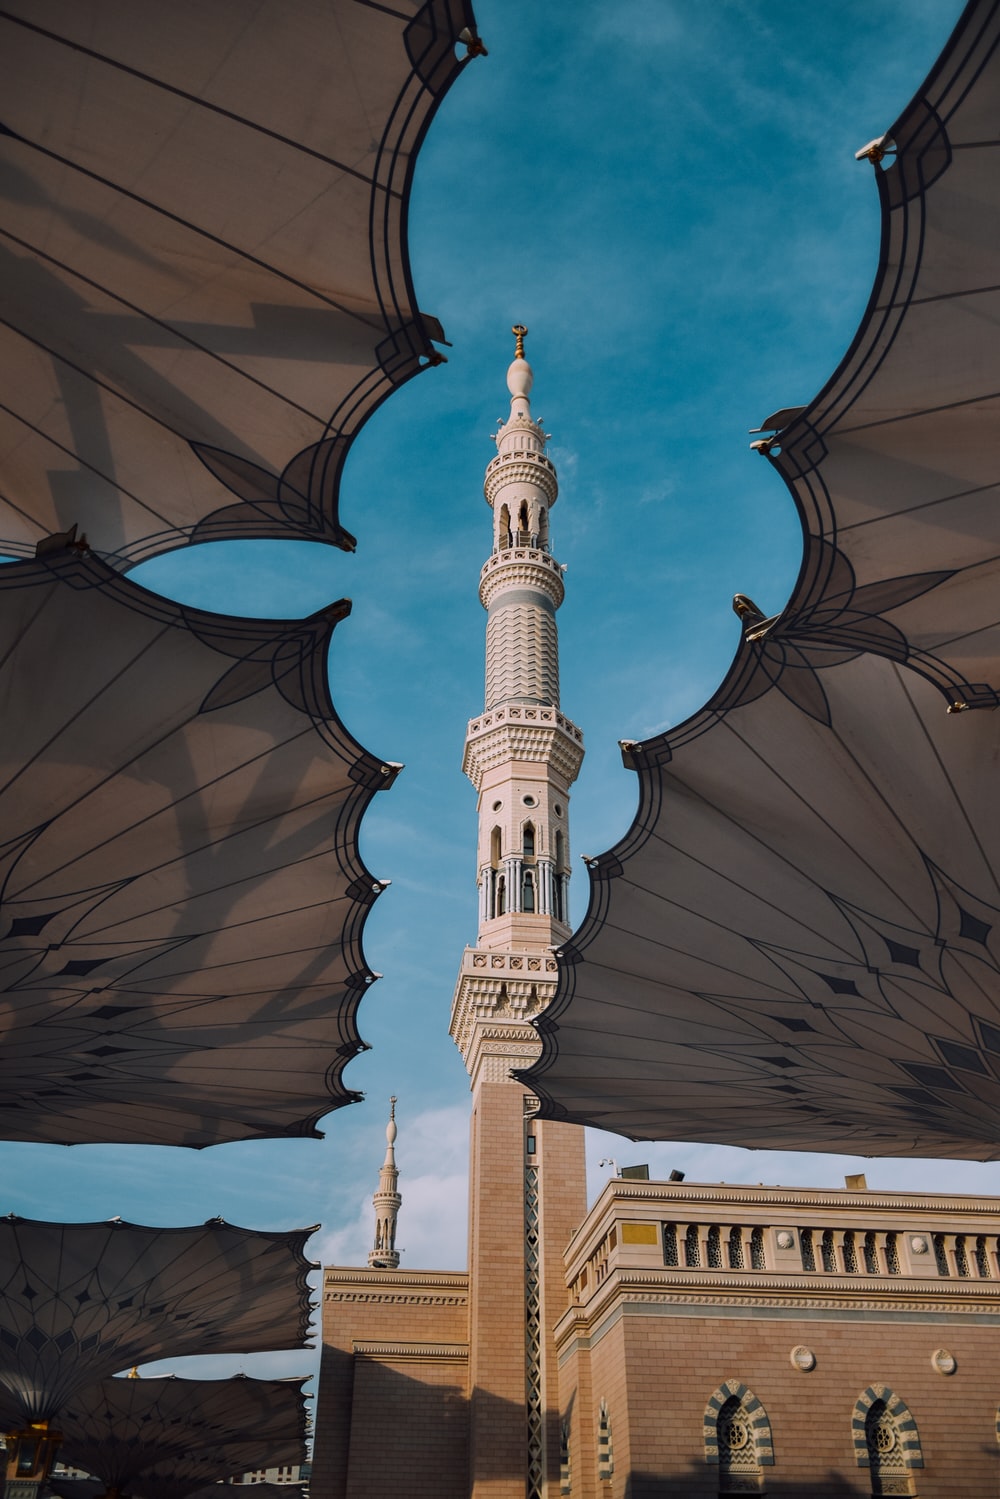 Quba Mosque Picture. Download Free Image